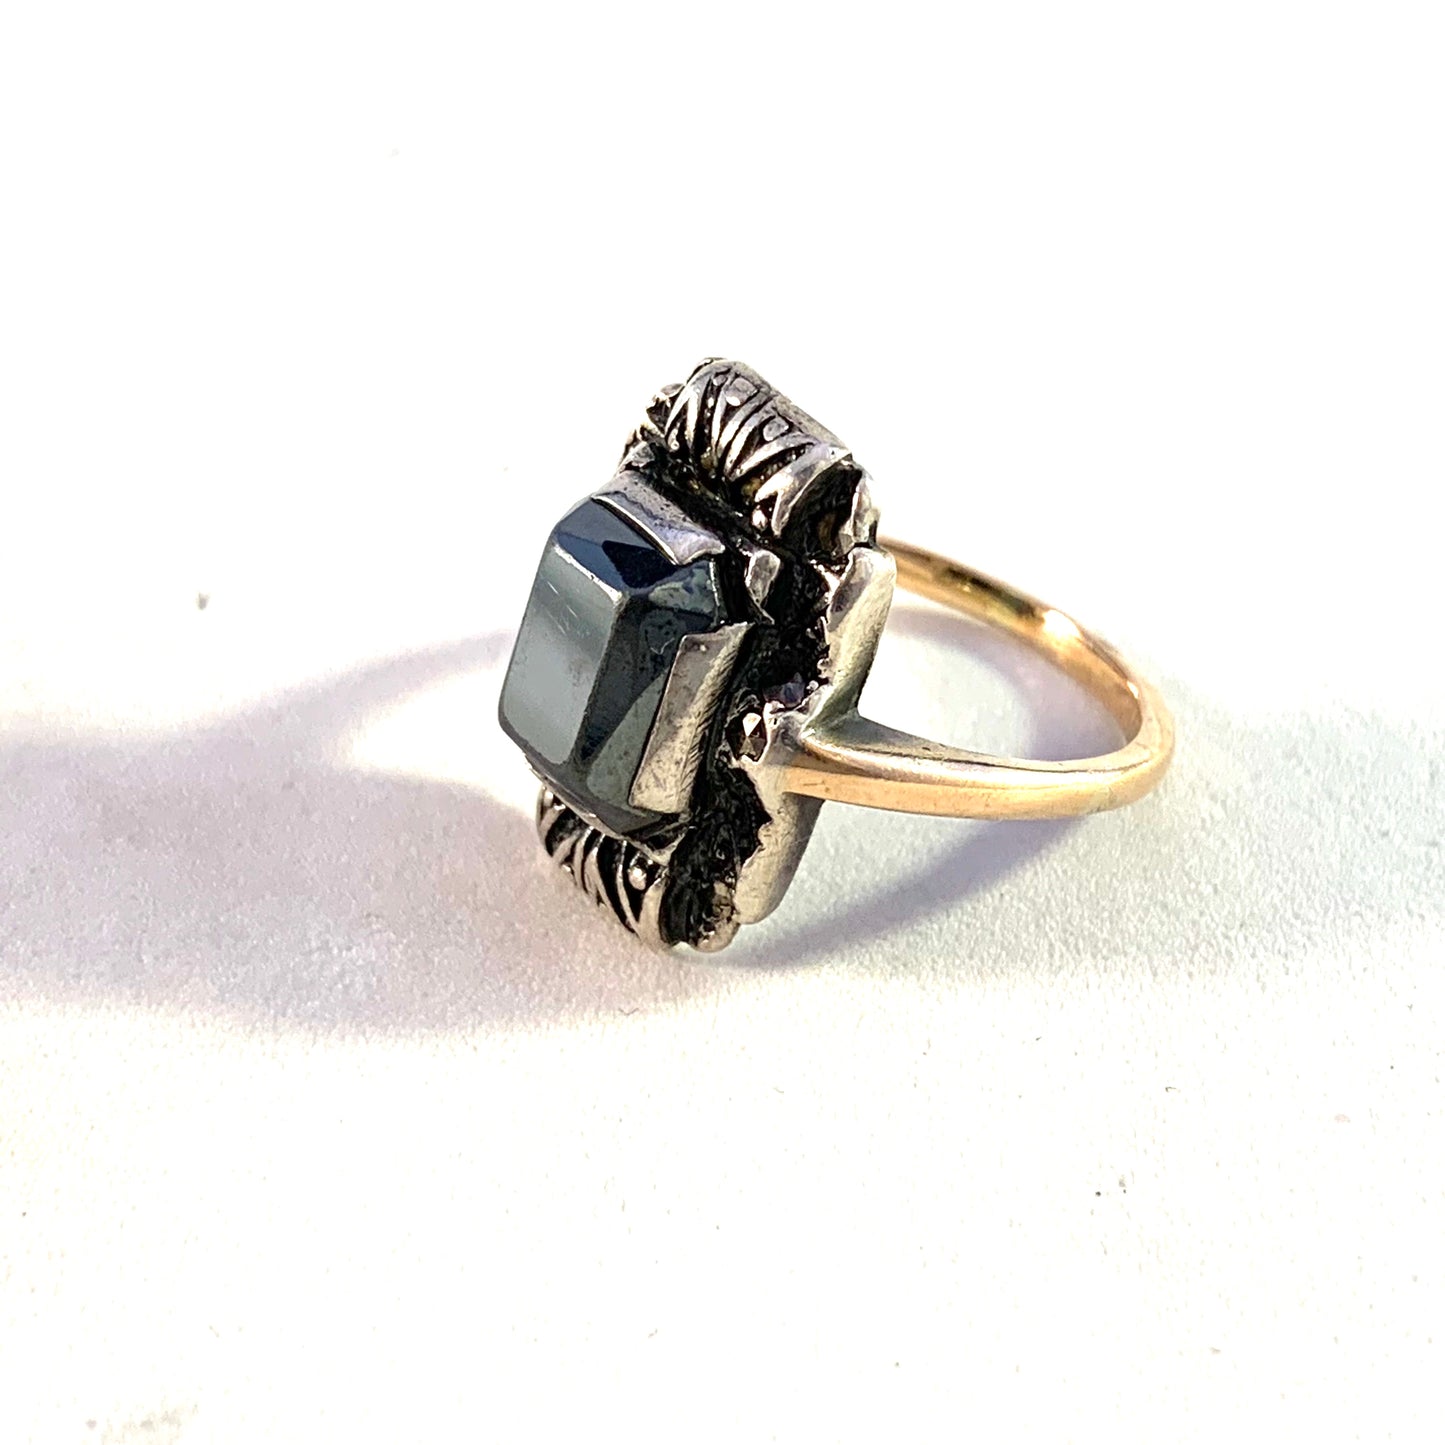 Art Deco 14k Gold Silver Onyx Marcasite Ring.